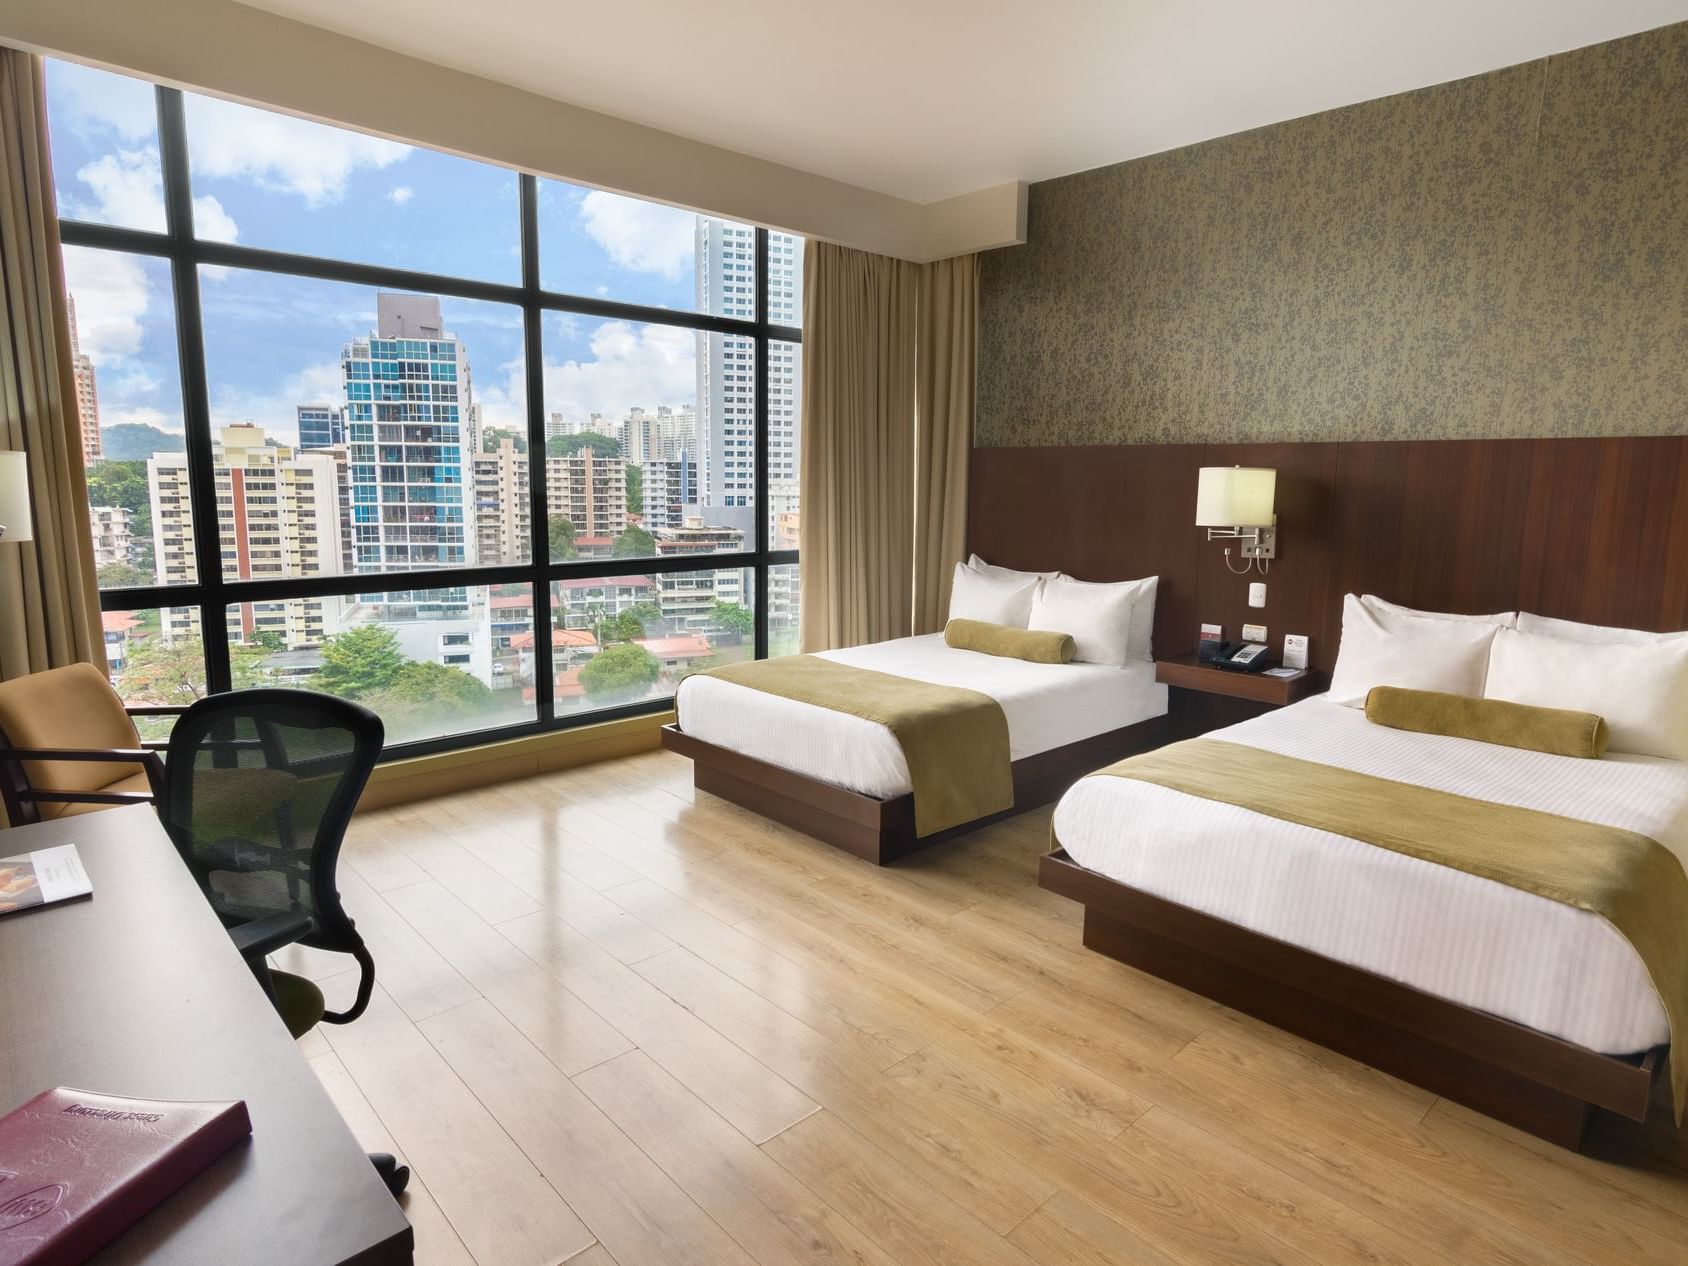 The Superior Twin Room with two double beds, a desk, a chair, a side table in between the beds with a lamp and a view of the city